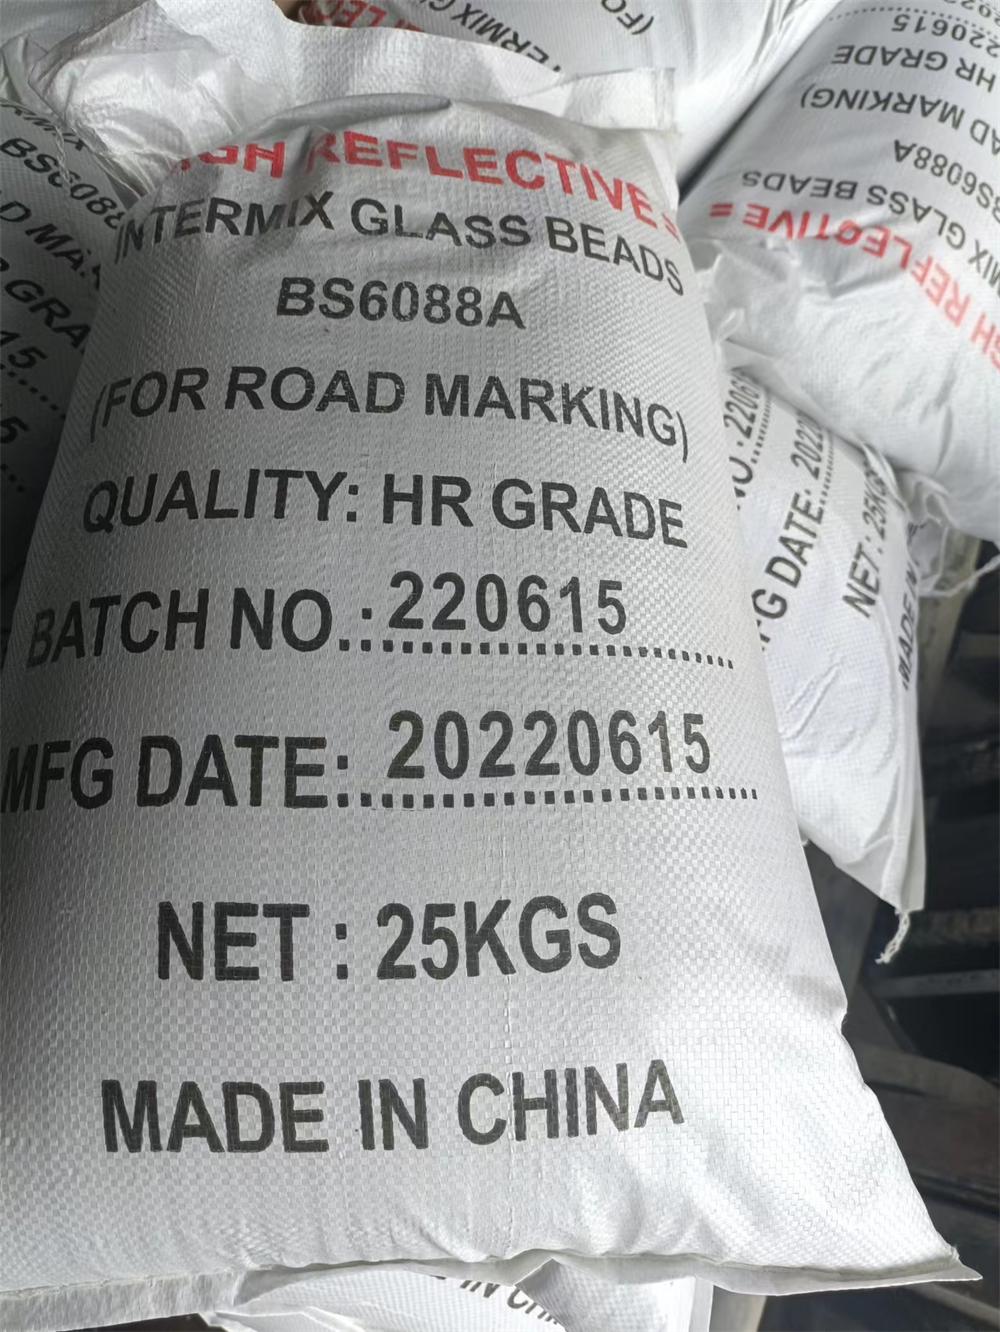 Loading Reflective glass beads for Jakarta,Indonesia